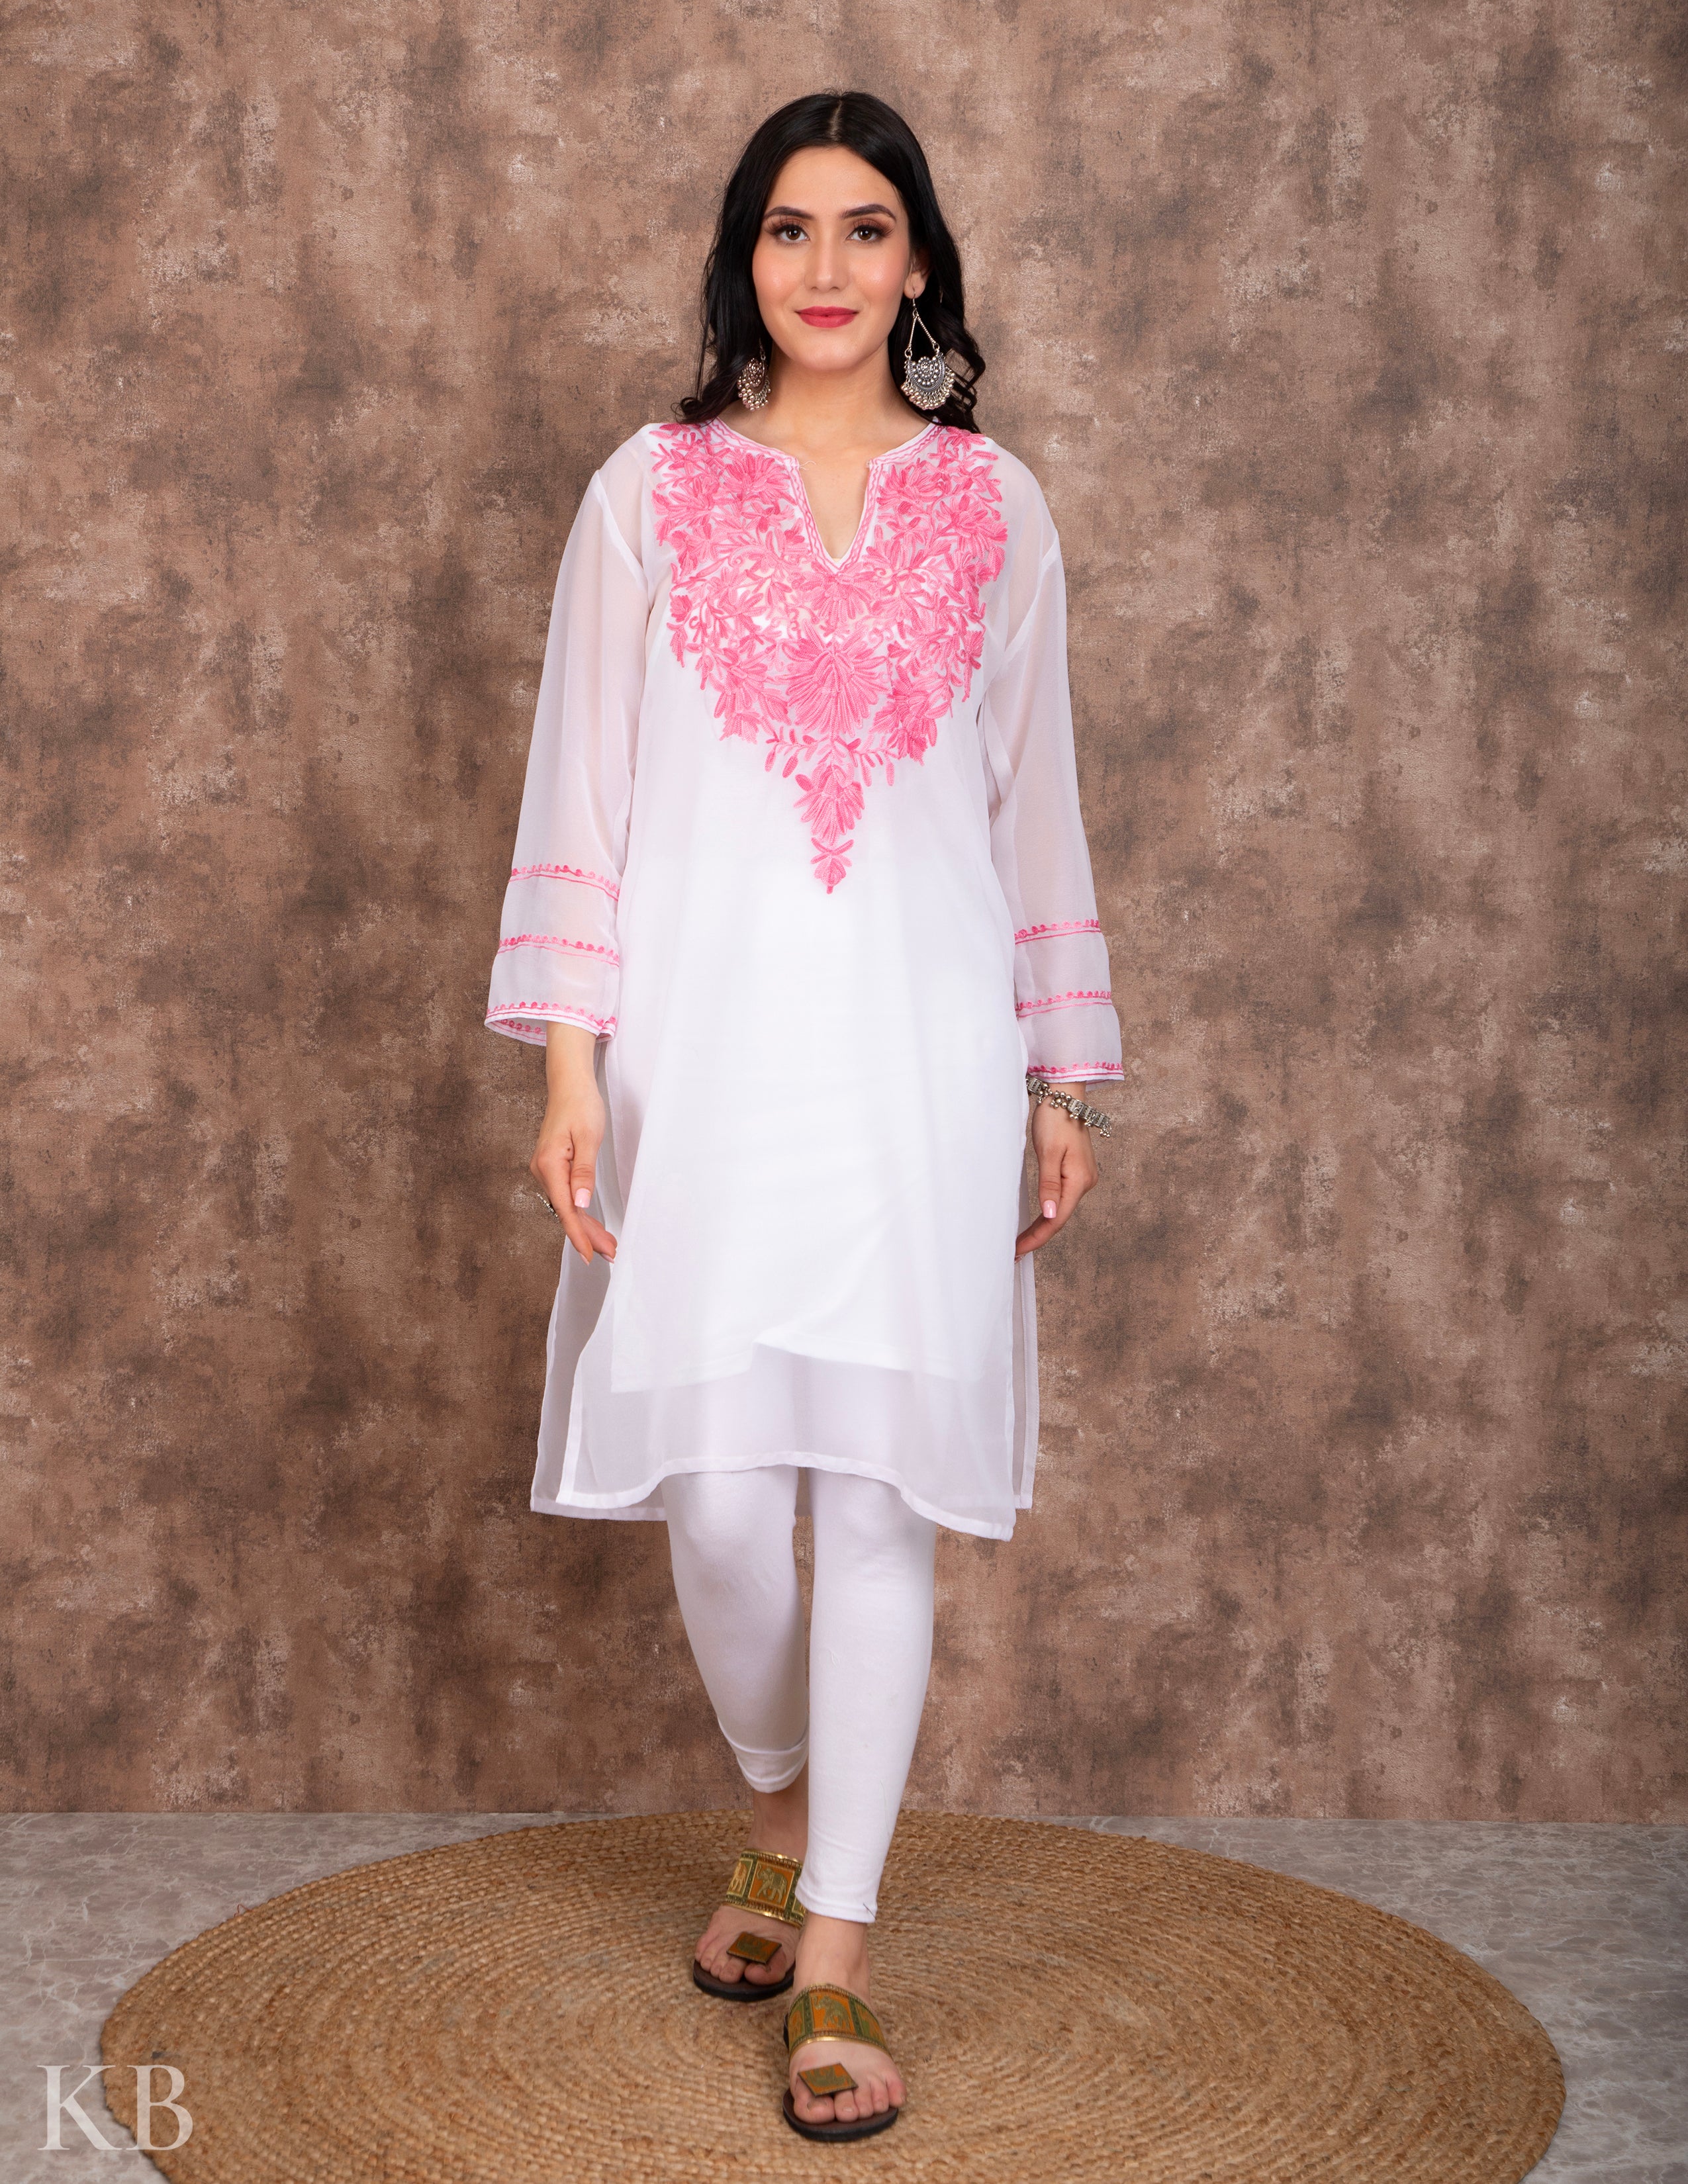 Jolly clothing co - Woolen kurtis & Full suit shawl sets that are sure to  bring stlyish, comfortable & classy look, back into your winter closet. .  #jollywomen #winterfashion #woolen #wool #winterwear #